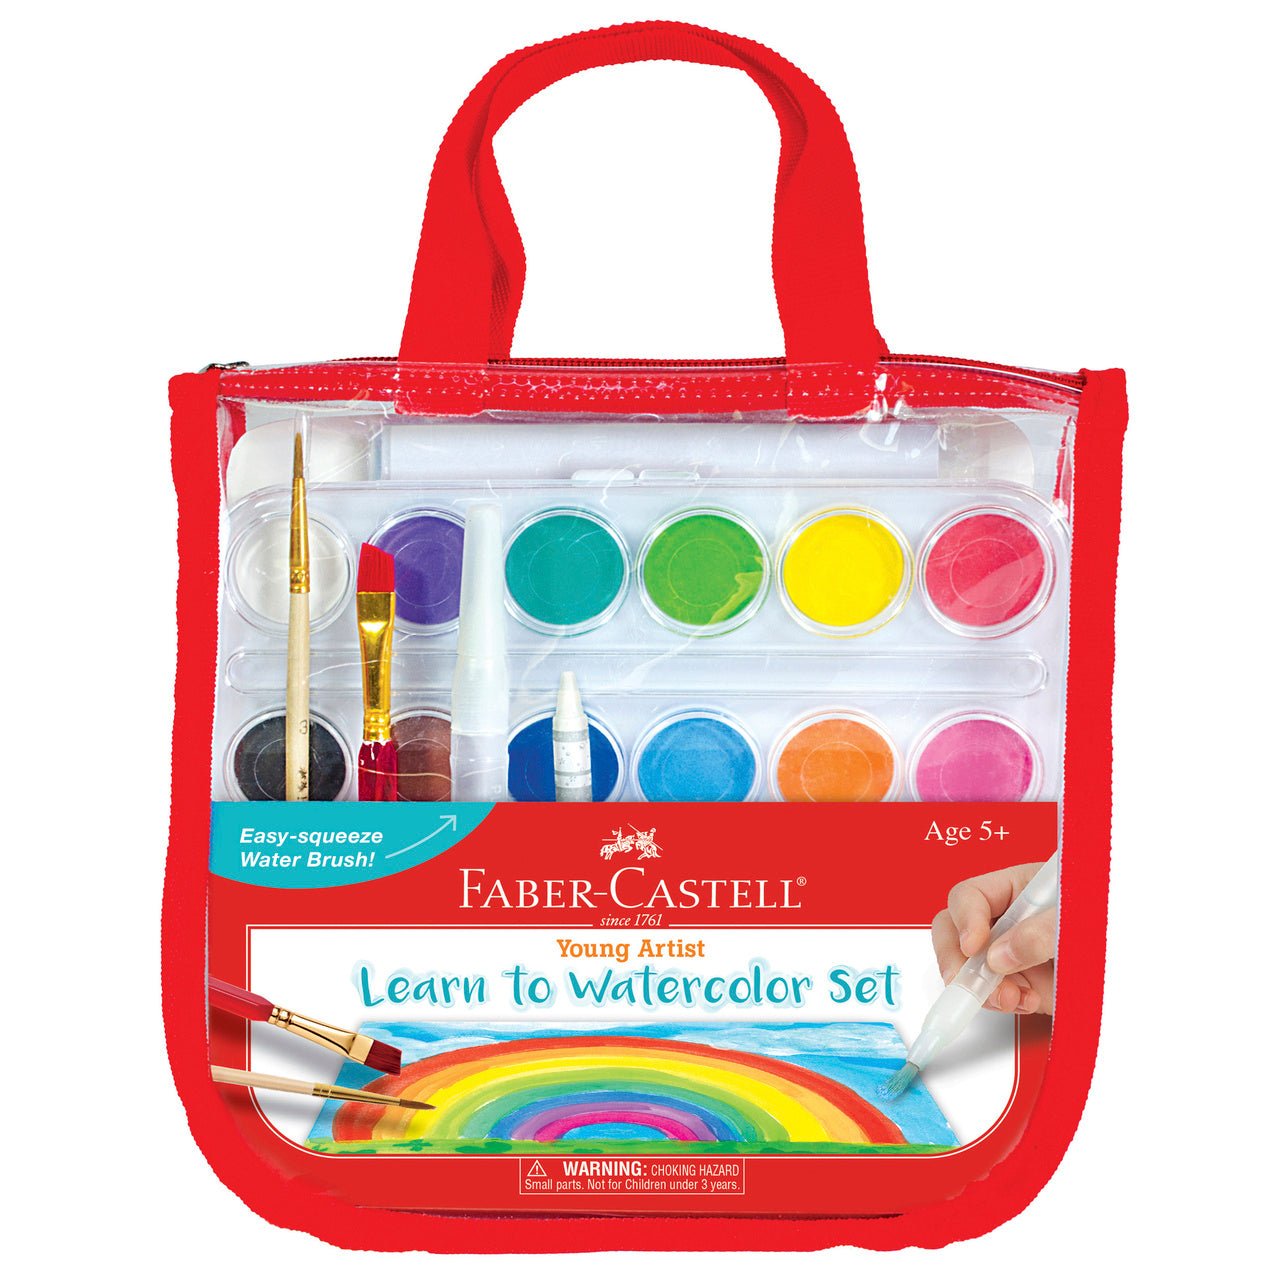 Faber-Castell Young Artist Learn to Watercolor Set - merriartist.com